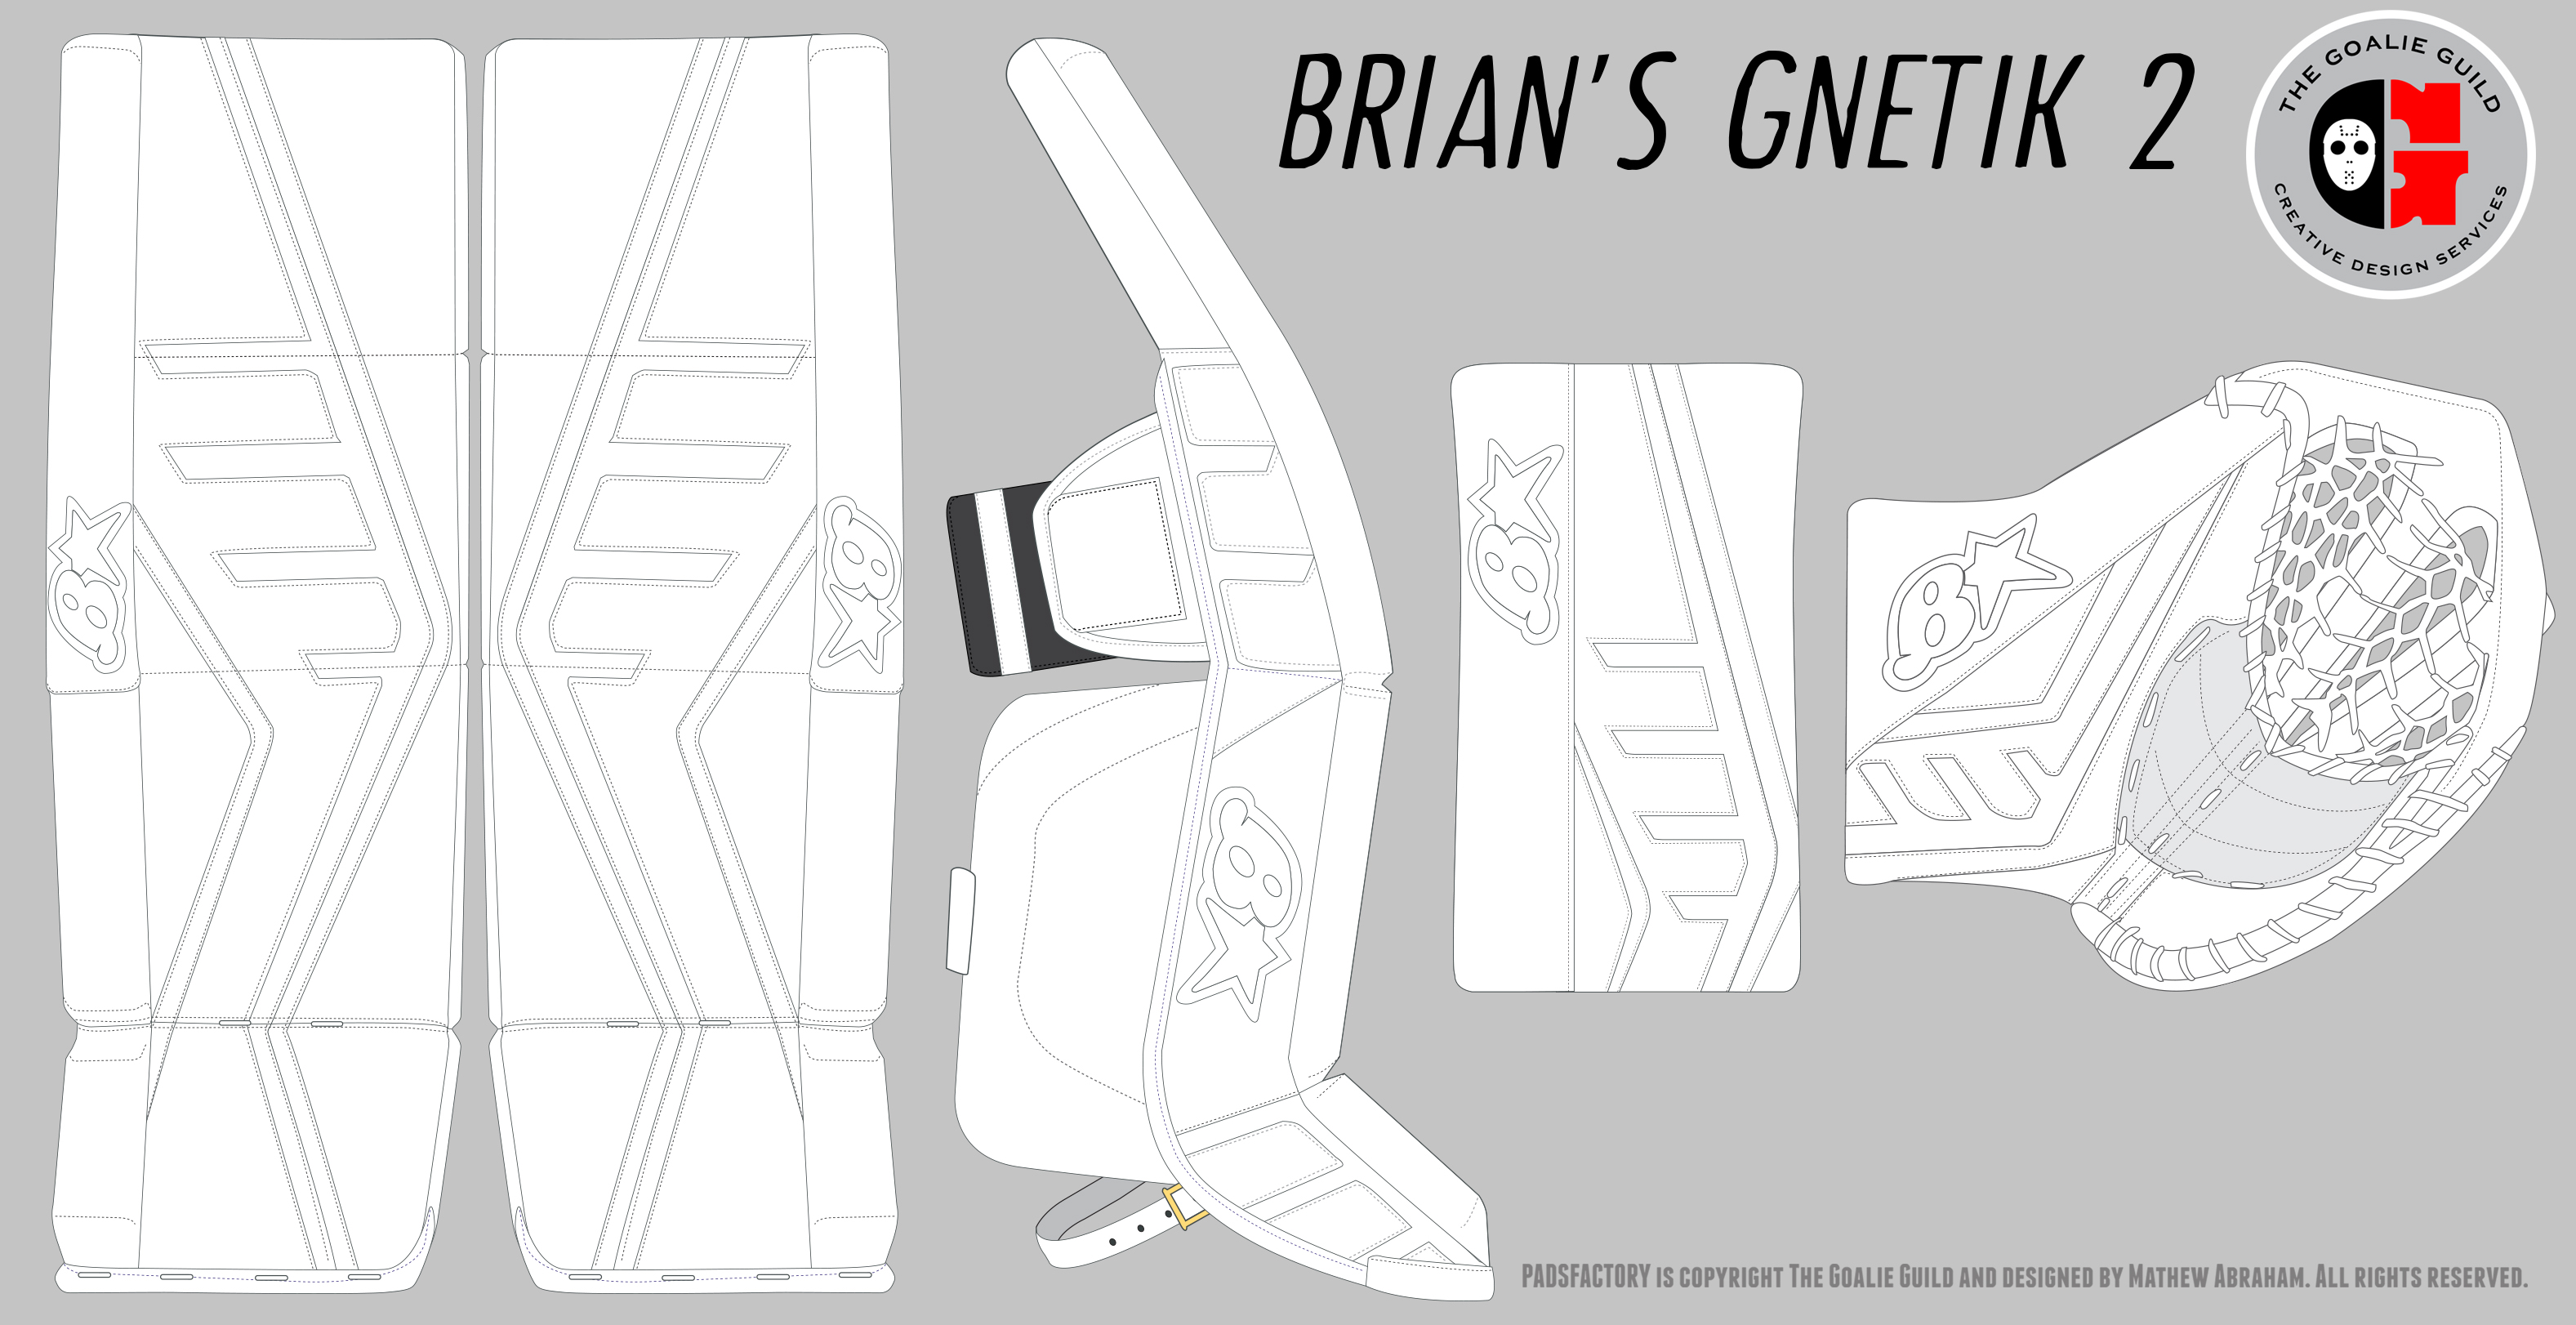 Pads & Glove Templates – The Goalie Archive